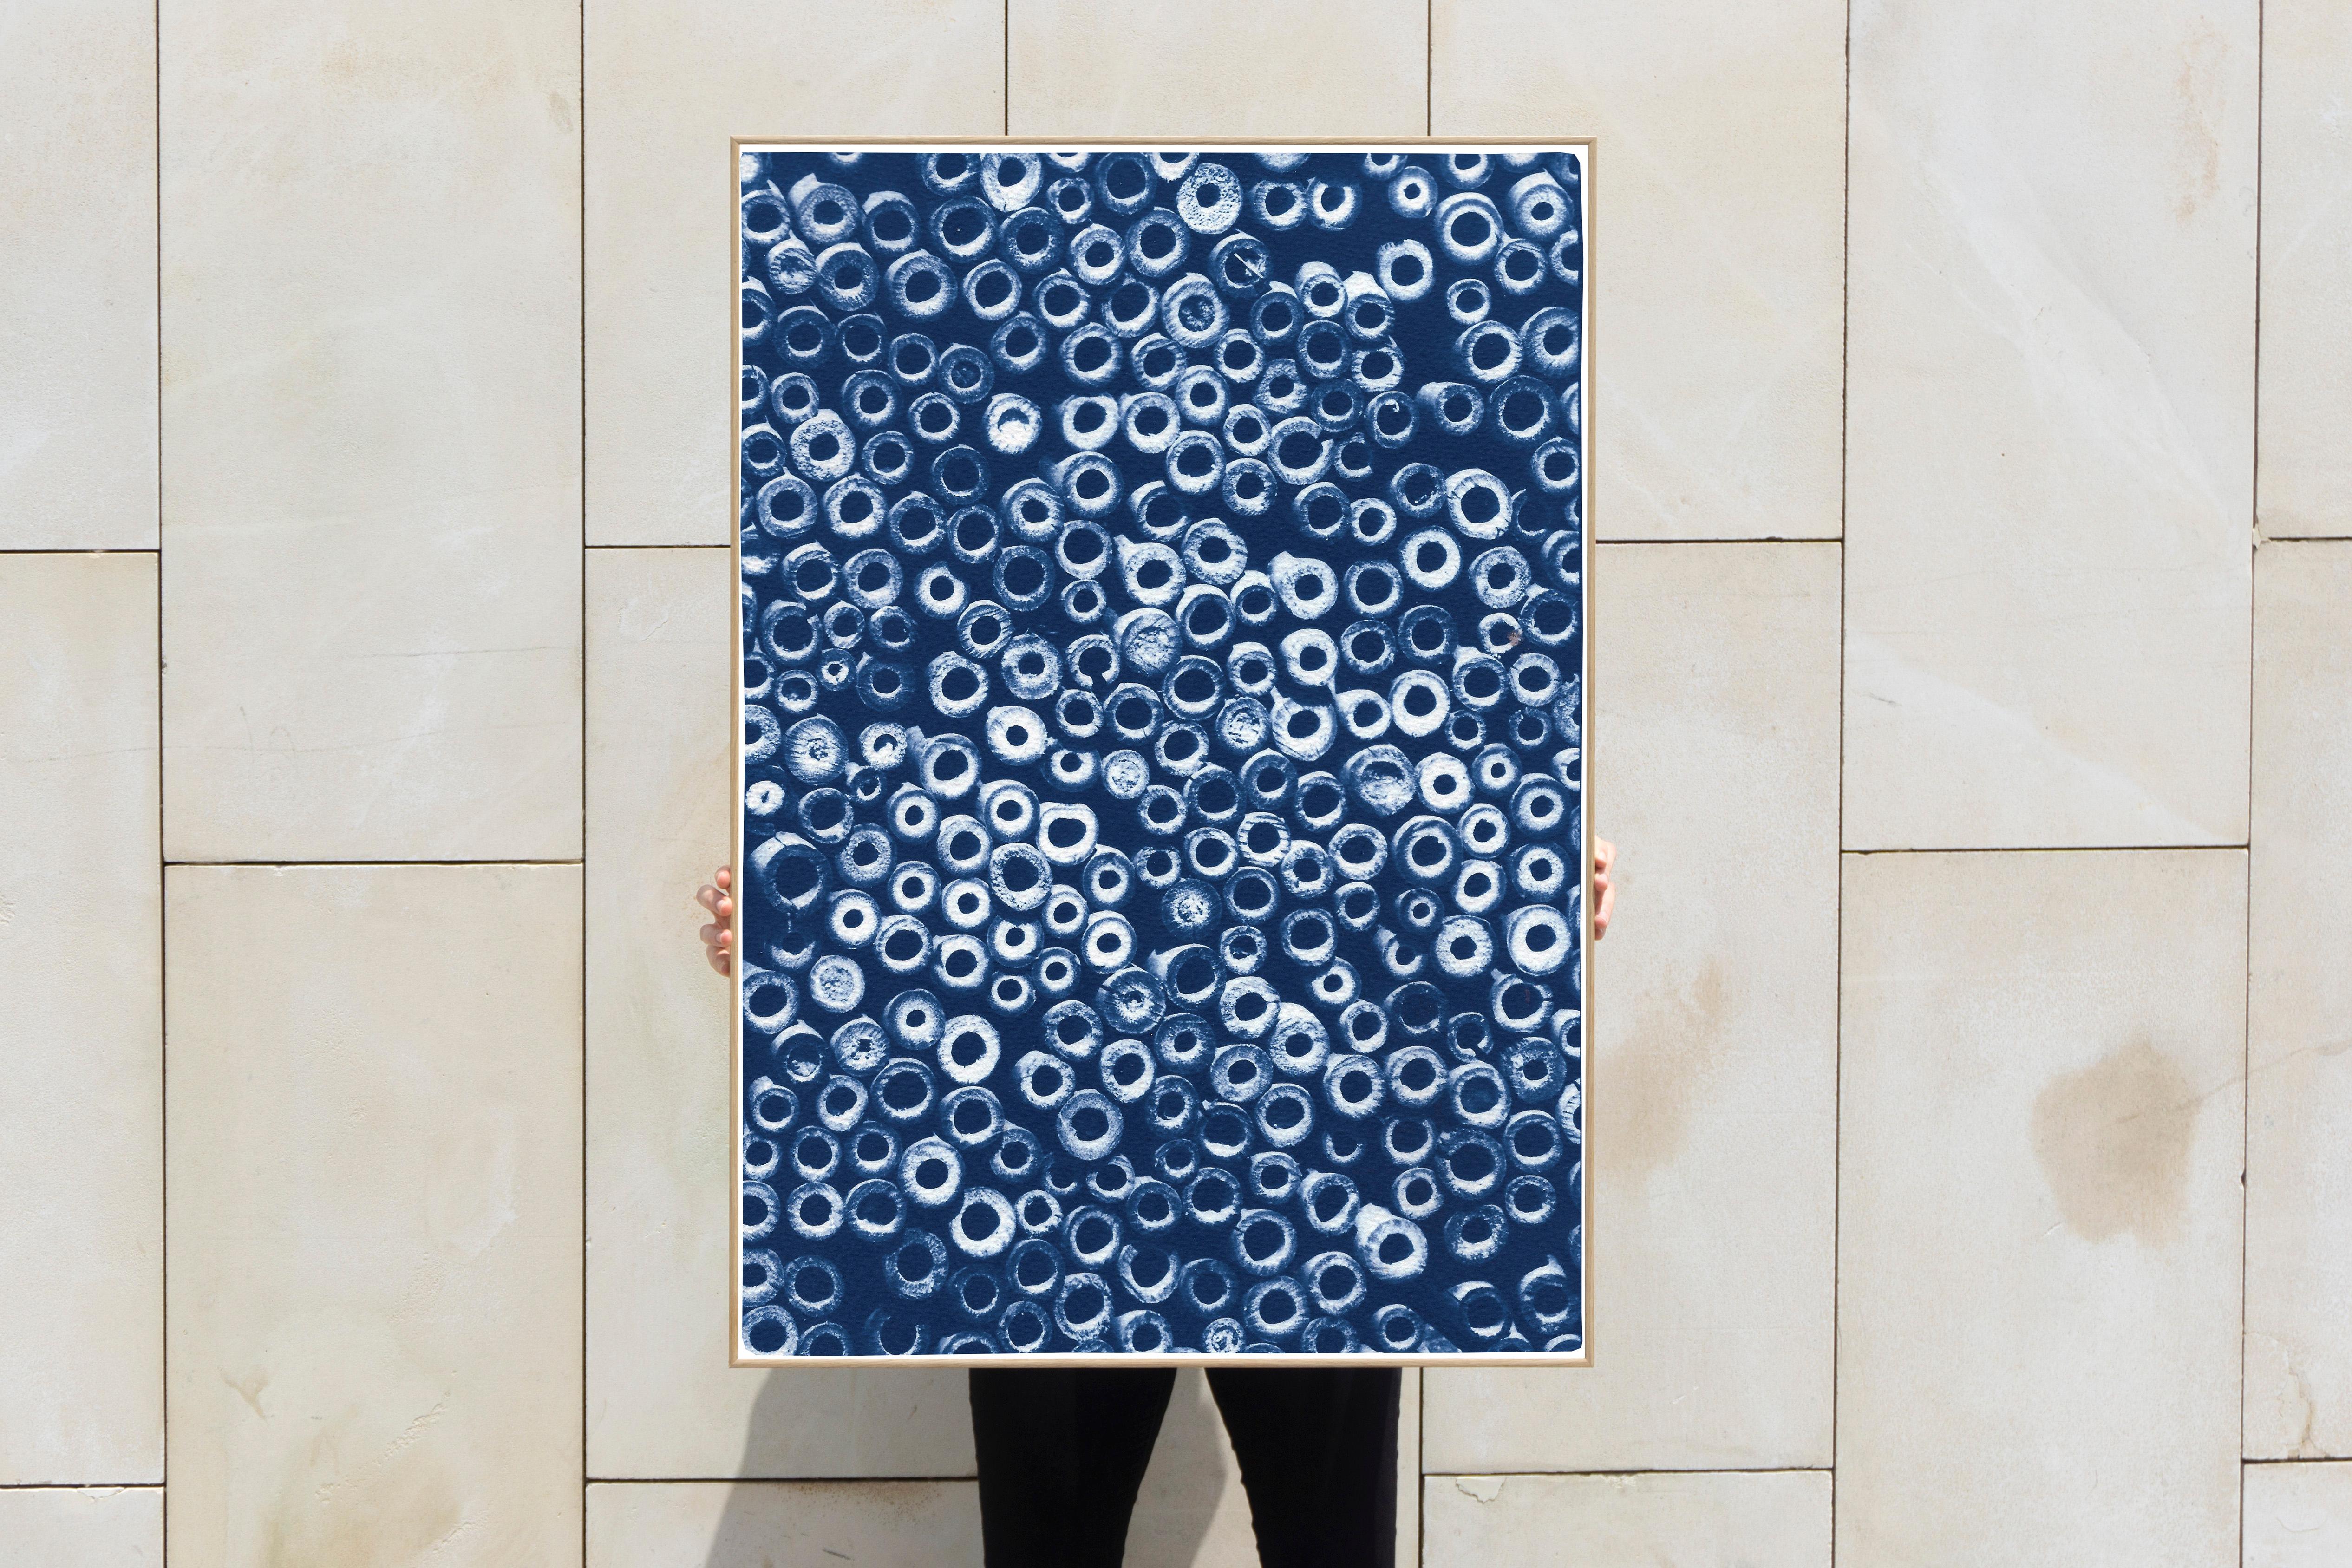 This is an exclusive handprinted limited edition cyanotype of a beautiful pile of cut bamboo circles.

Details:
+ Title: Cut Bamboo Circles 
+ Year: 2021
+ Edition Size: 100
+ Stamped and Certificate of Authenticity provided
+ Measurements : 70x100